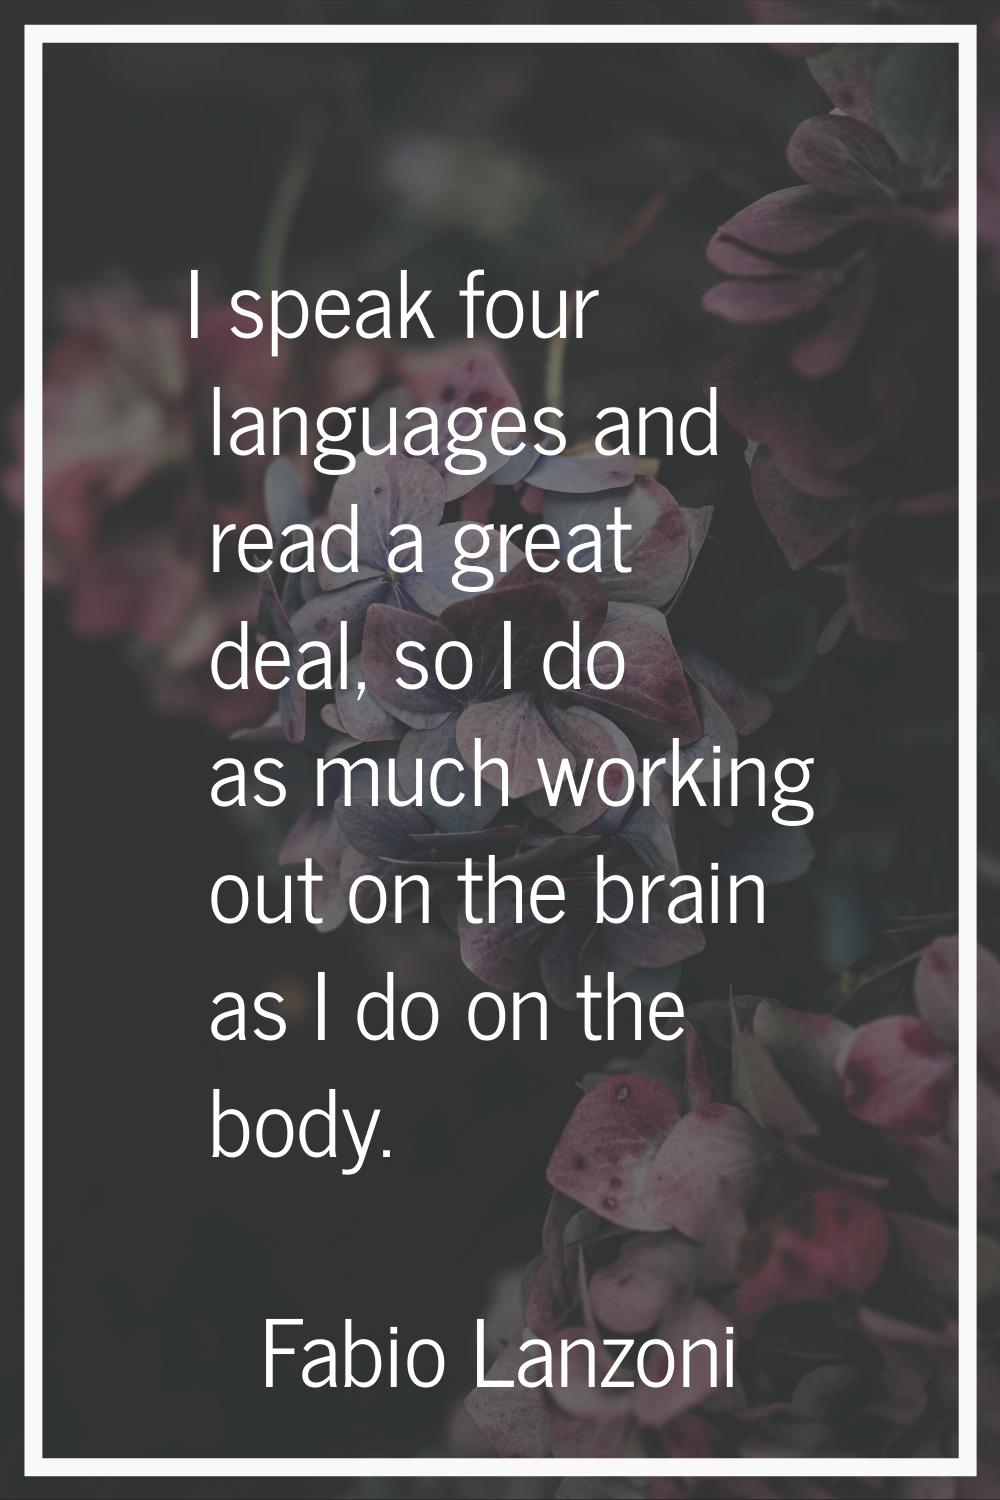 I speak four languages and read a great deal, so I do as much working out on the brain as I do on t